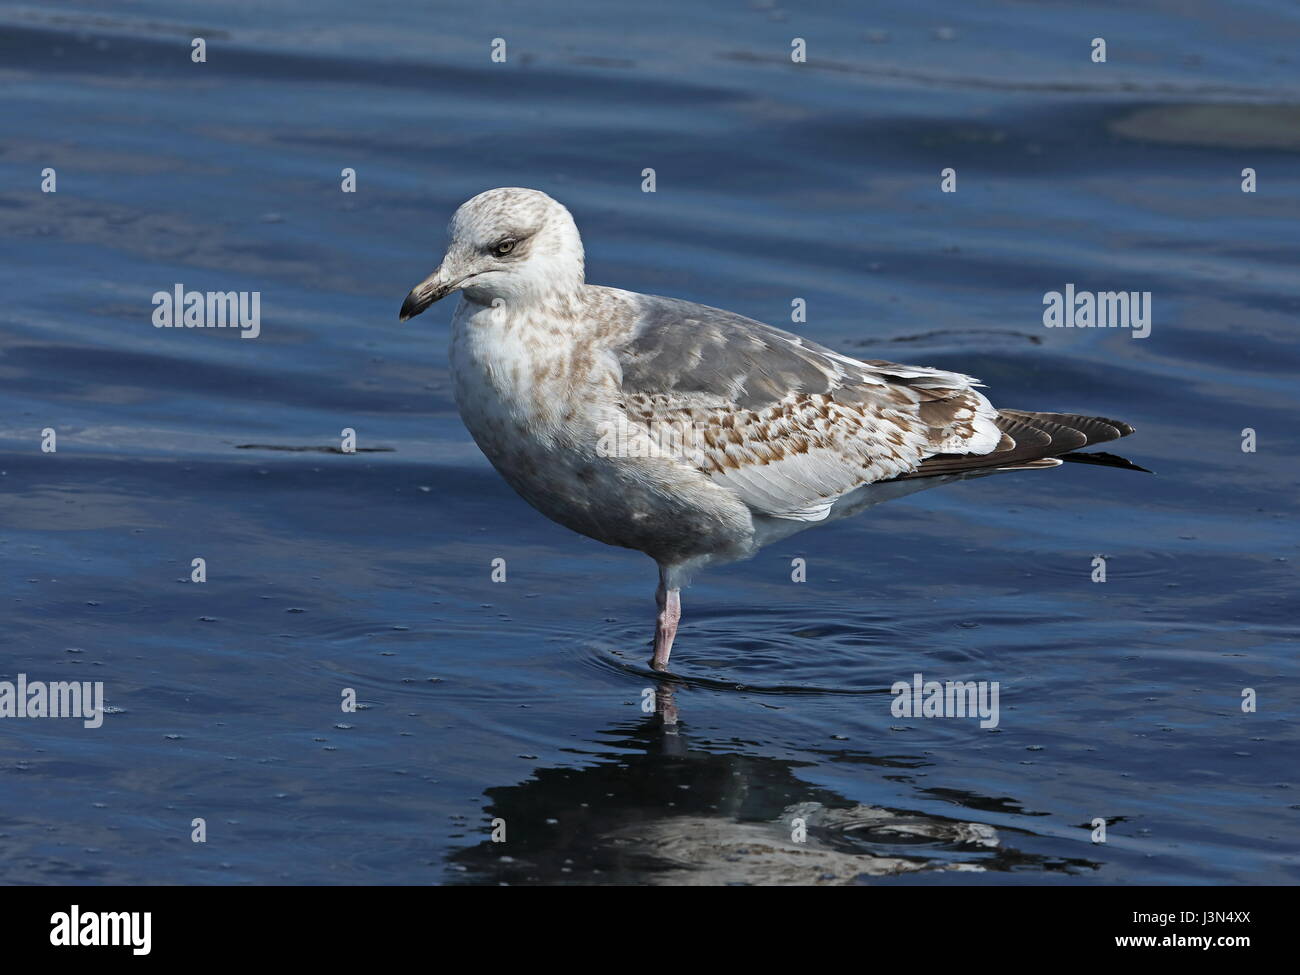 Slaty-backed Gull (Larus schistisagus) second winter standing in shallow water  Choshi, Chiba Prefecture, Japan      February Stock Photo